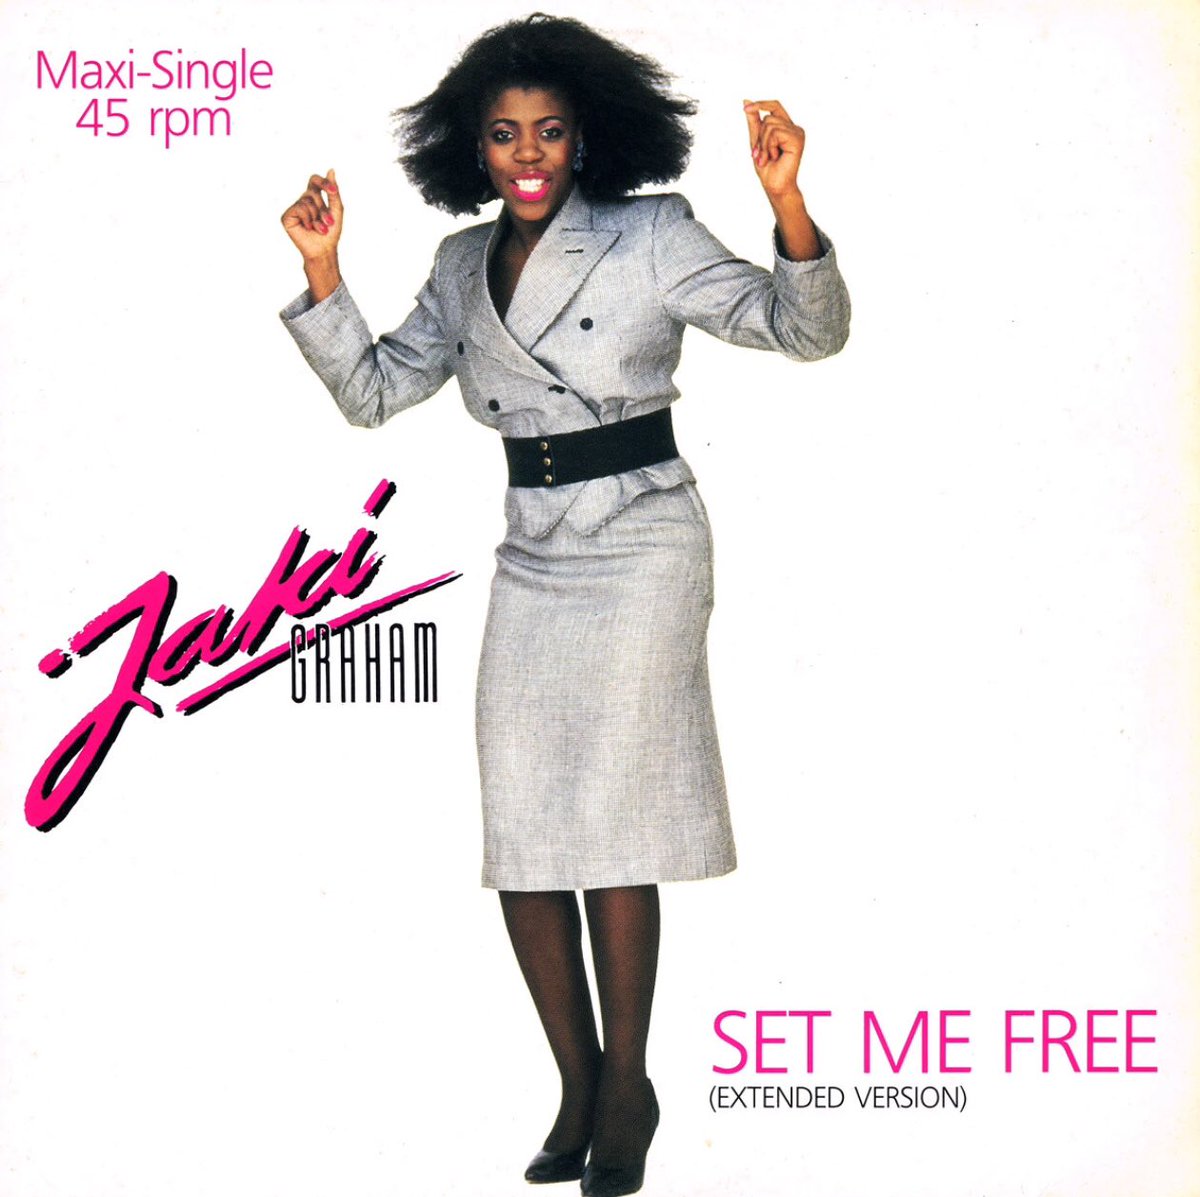 At Number 20 in the U.K. charts this week in 1986 and on Top Of The Pops (22/05/86).
Jaki Graham “Set Me Fee”
m.youtube.com/watch?v=B73K6d…
WHAT A SONG AND PERFORMANCE! 
@Jaki_Graham @NatalieGraham81 @JNTMusic @parlophone 
#JakiGraham #UKSoul #80sPop #80sSoul #TOTP86